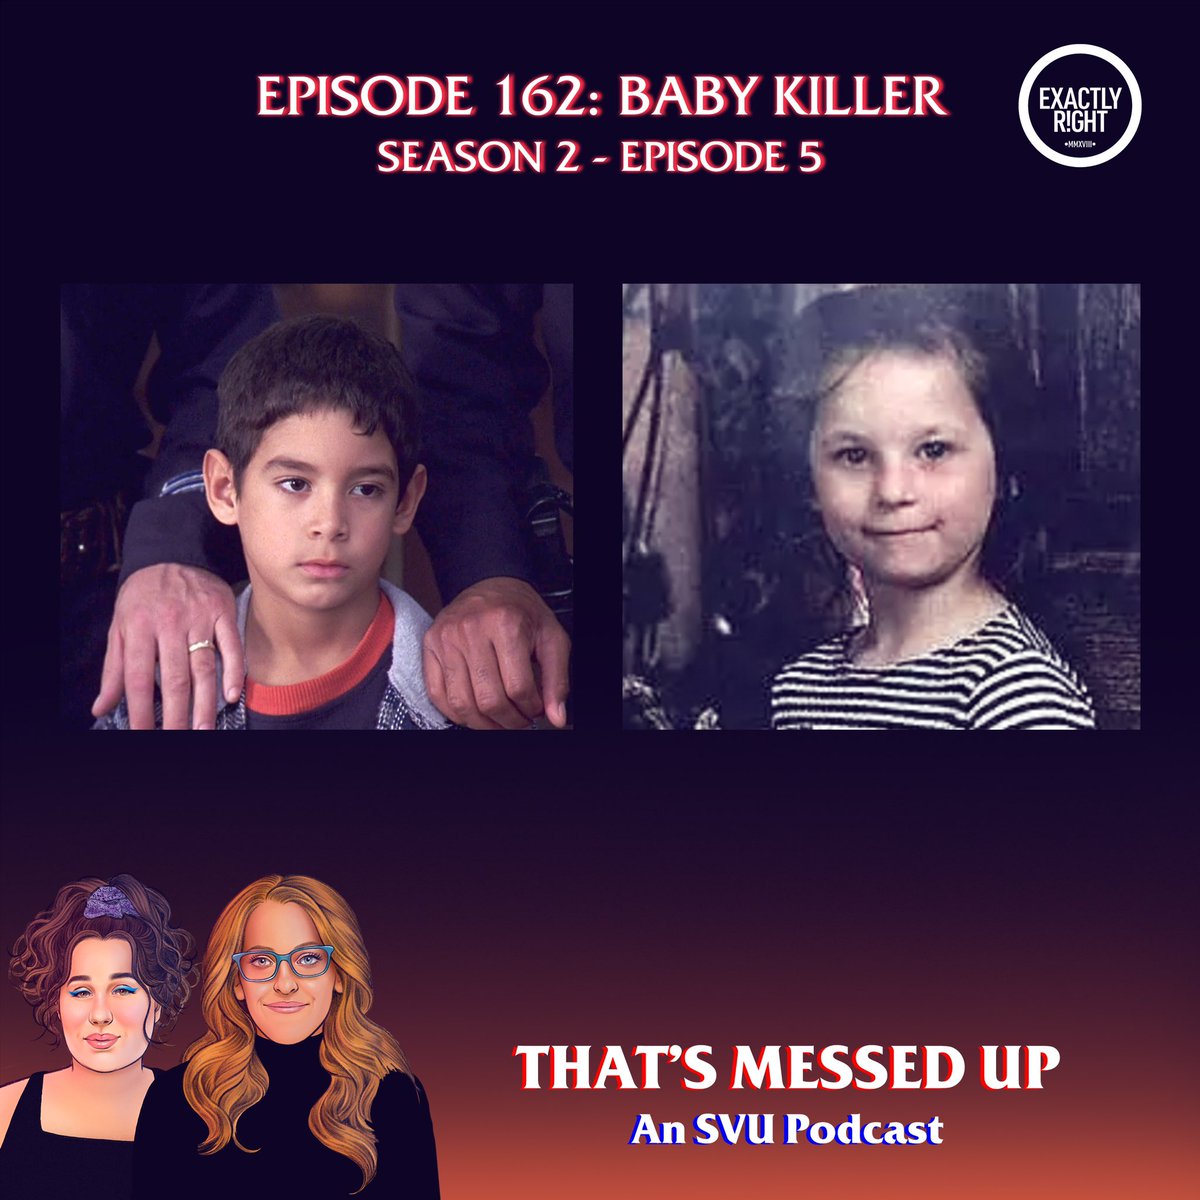 NEW EPISODE - Episode 162 “Baby Killer” is up on @exactlyright! This one’s an oldie, a goodie, a saddie. Listen on @applepodcasts podcasts.apple.com/us/podcast/tha… or wherever you podcast! #svu #dundun #lawandordersvu #lawandorder #elitesquad #benson #stabler #truecrime #podcasts